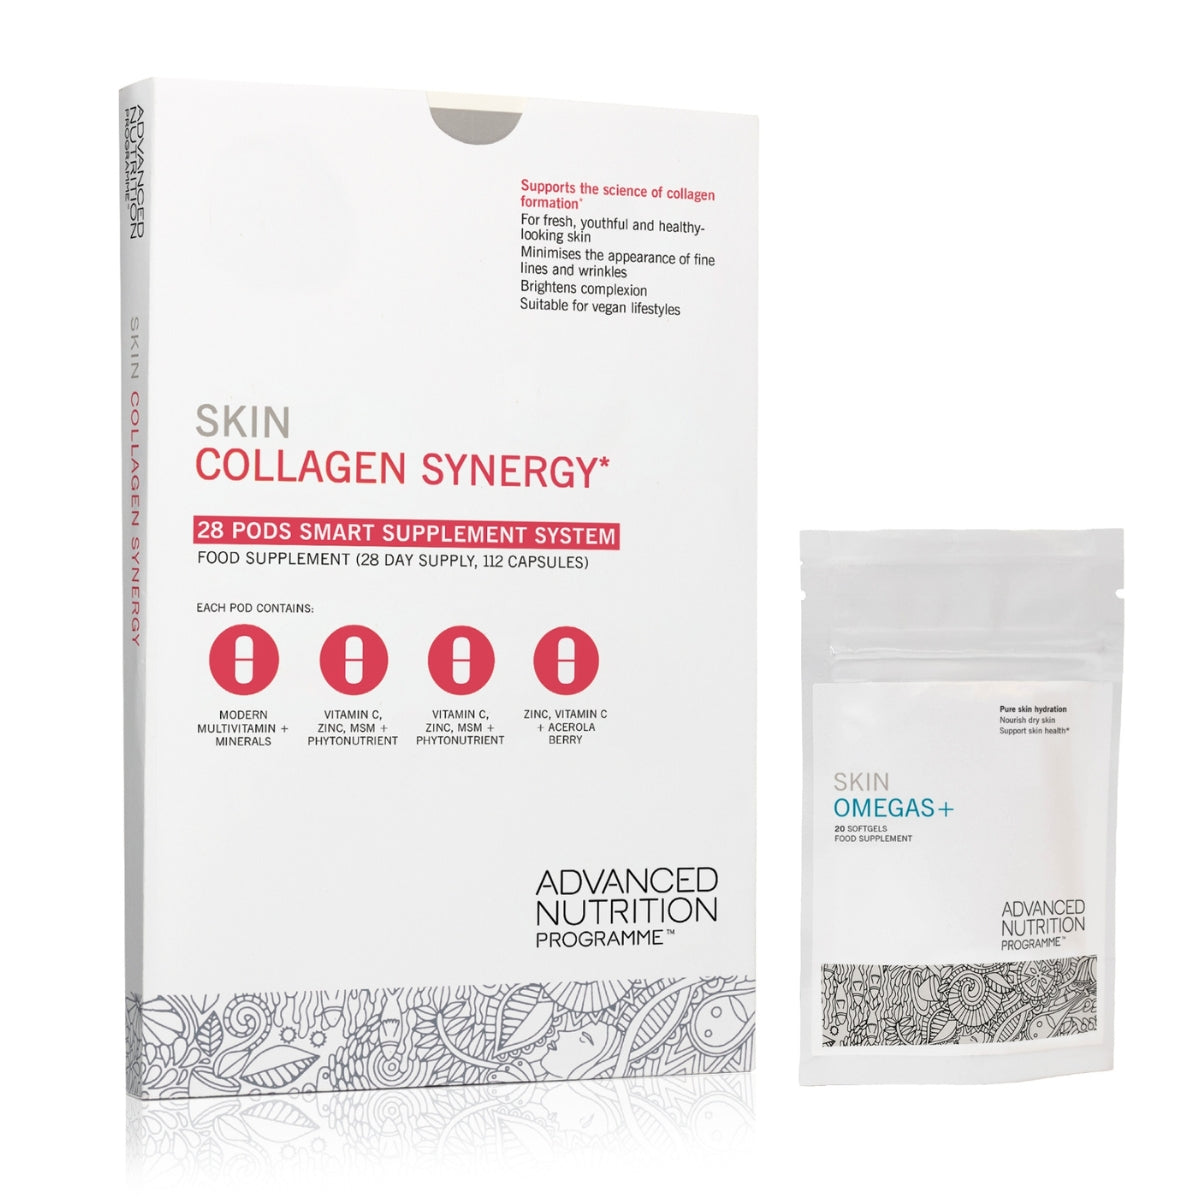 Advanced Nutrition Programme Skin Collagen Synergy and Discovery Omegas